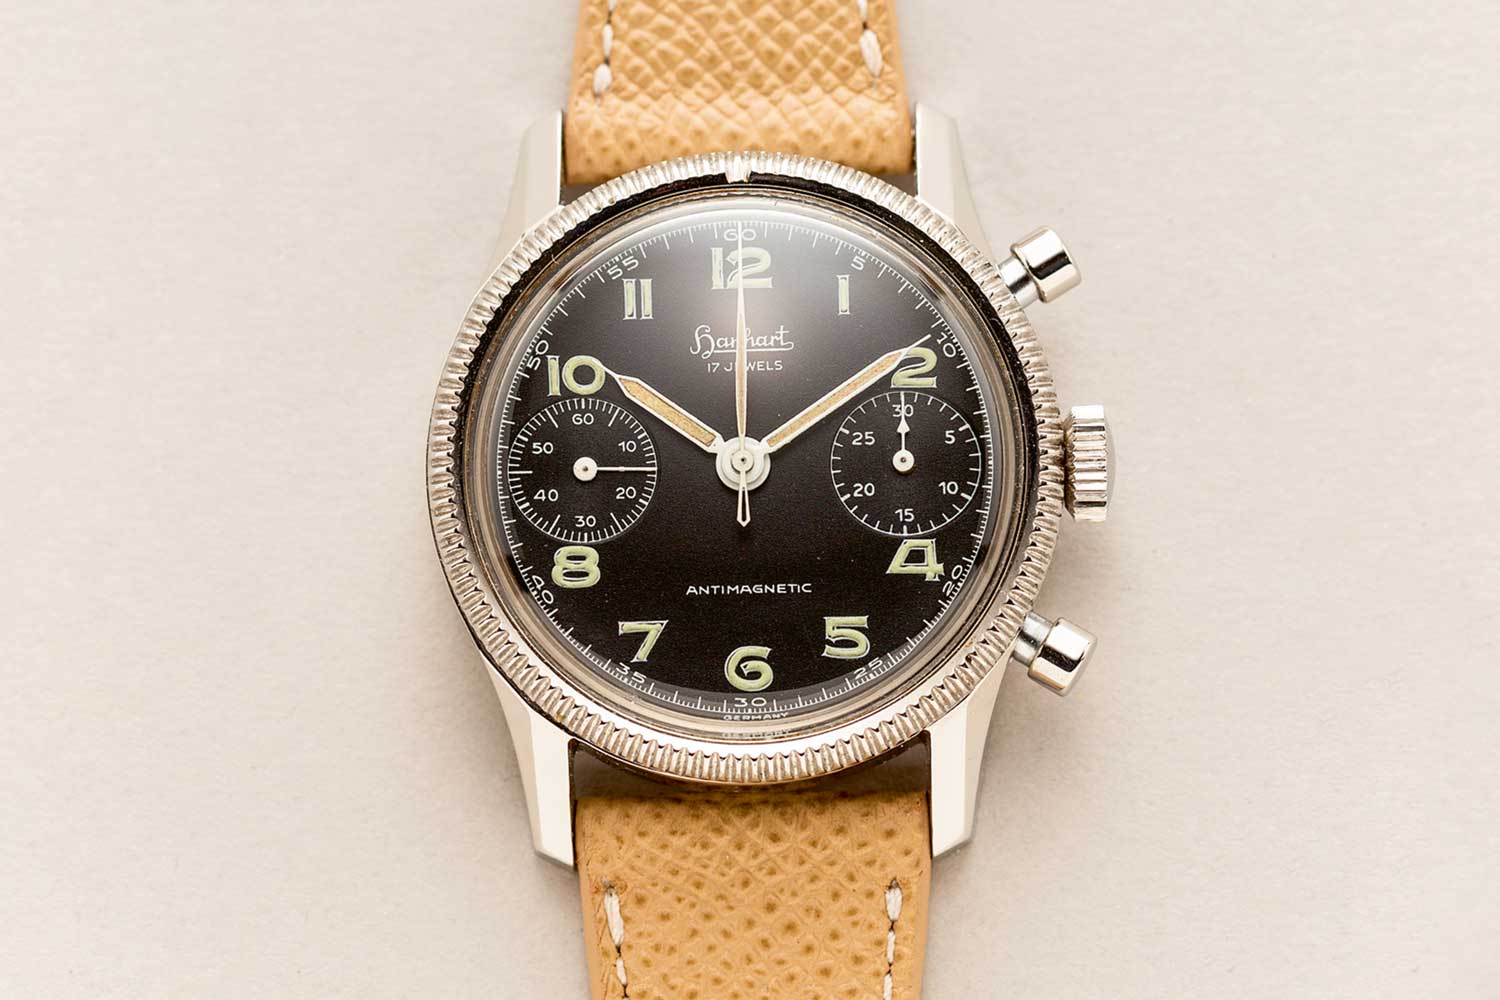 An instance of the Hanhart 417 ES, made between 1956 and 1958. Only 500 pieces were made with the designation ES for stainless steel (Image: shucktheoyster.com)